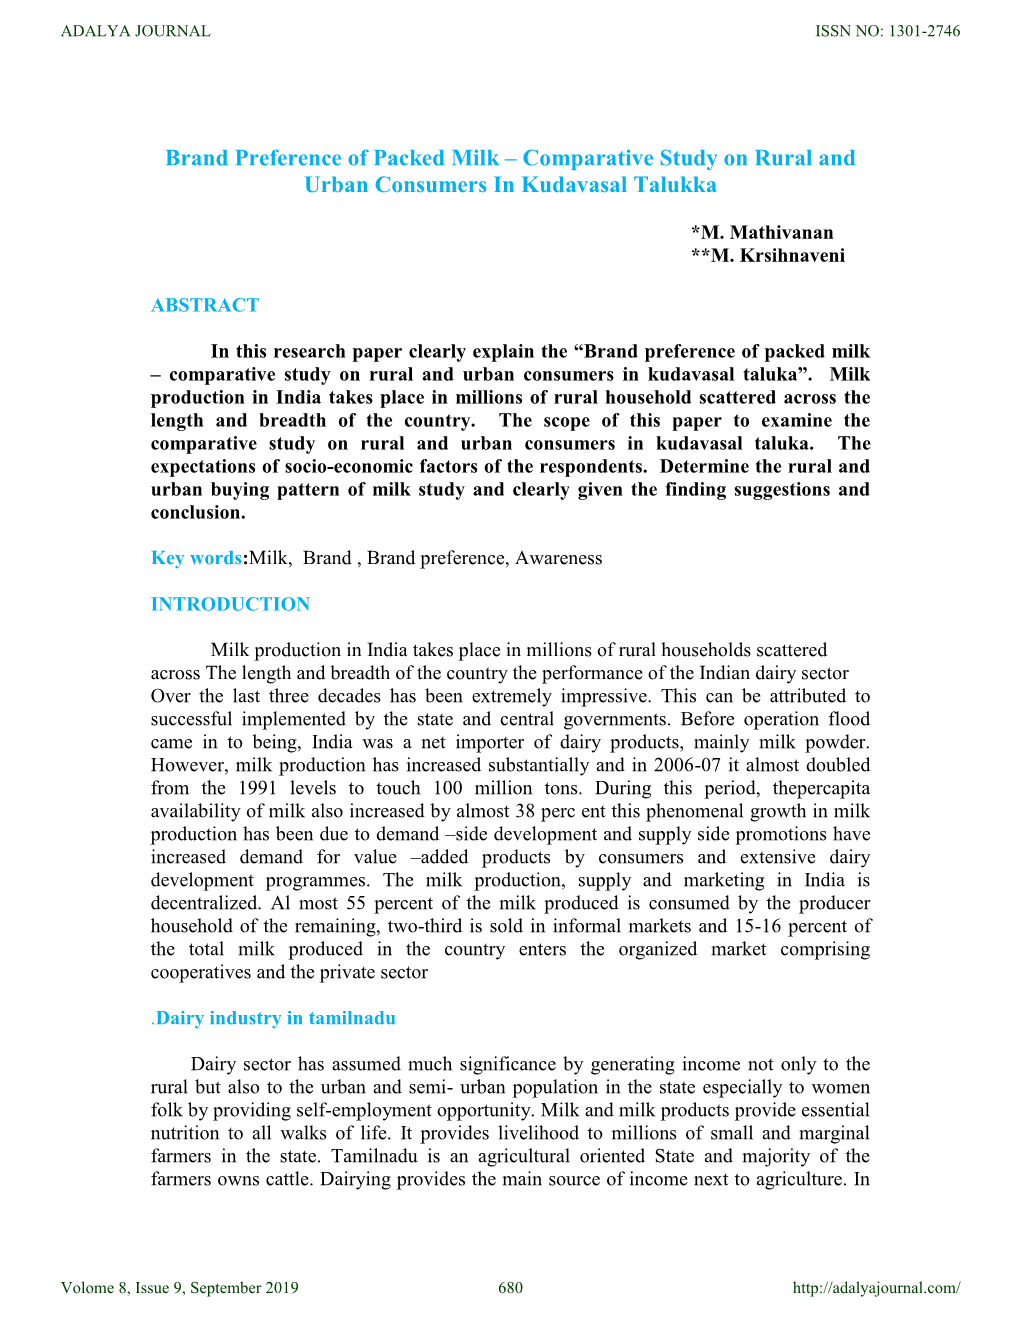 Brand Preference of Packed Milk – Comparative Study on Rural and Urban Consumers in Kudavasal Talukka